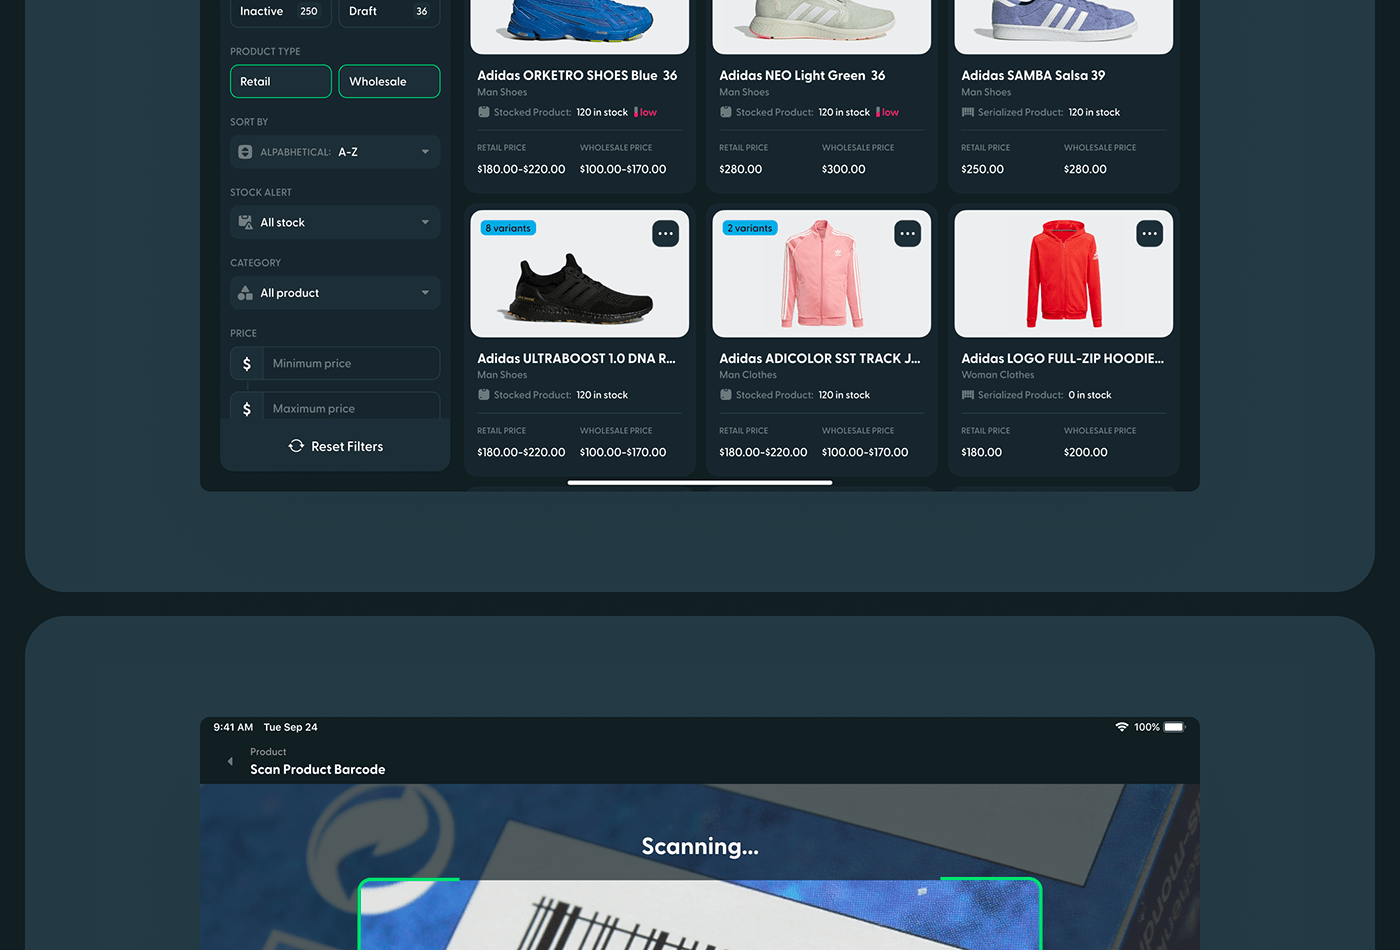 SAAS UI/UX user interface product design  inventory warehouse management app dashboard